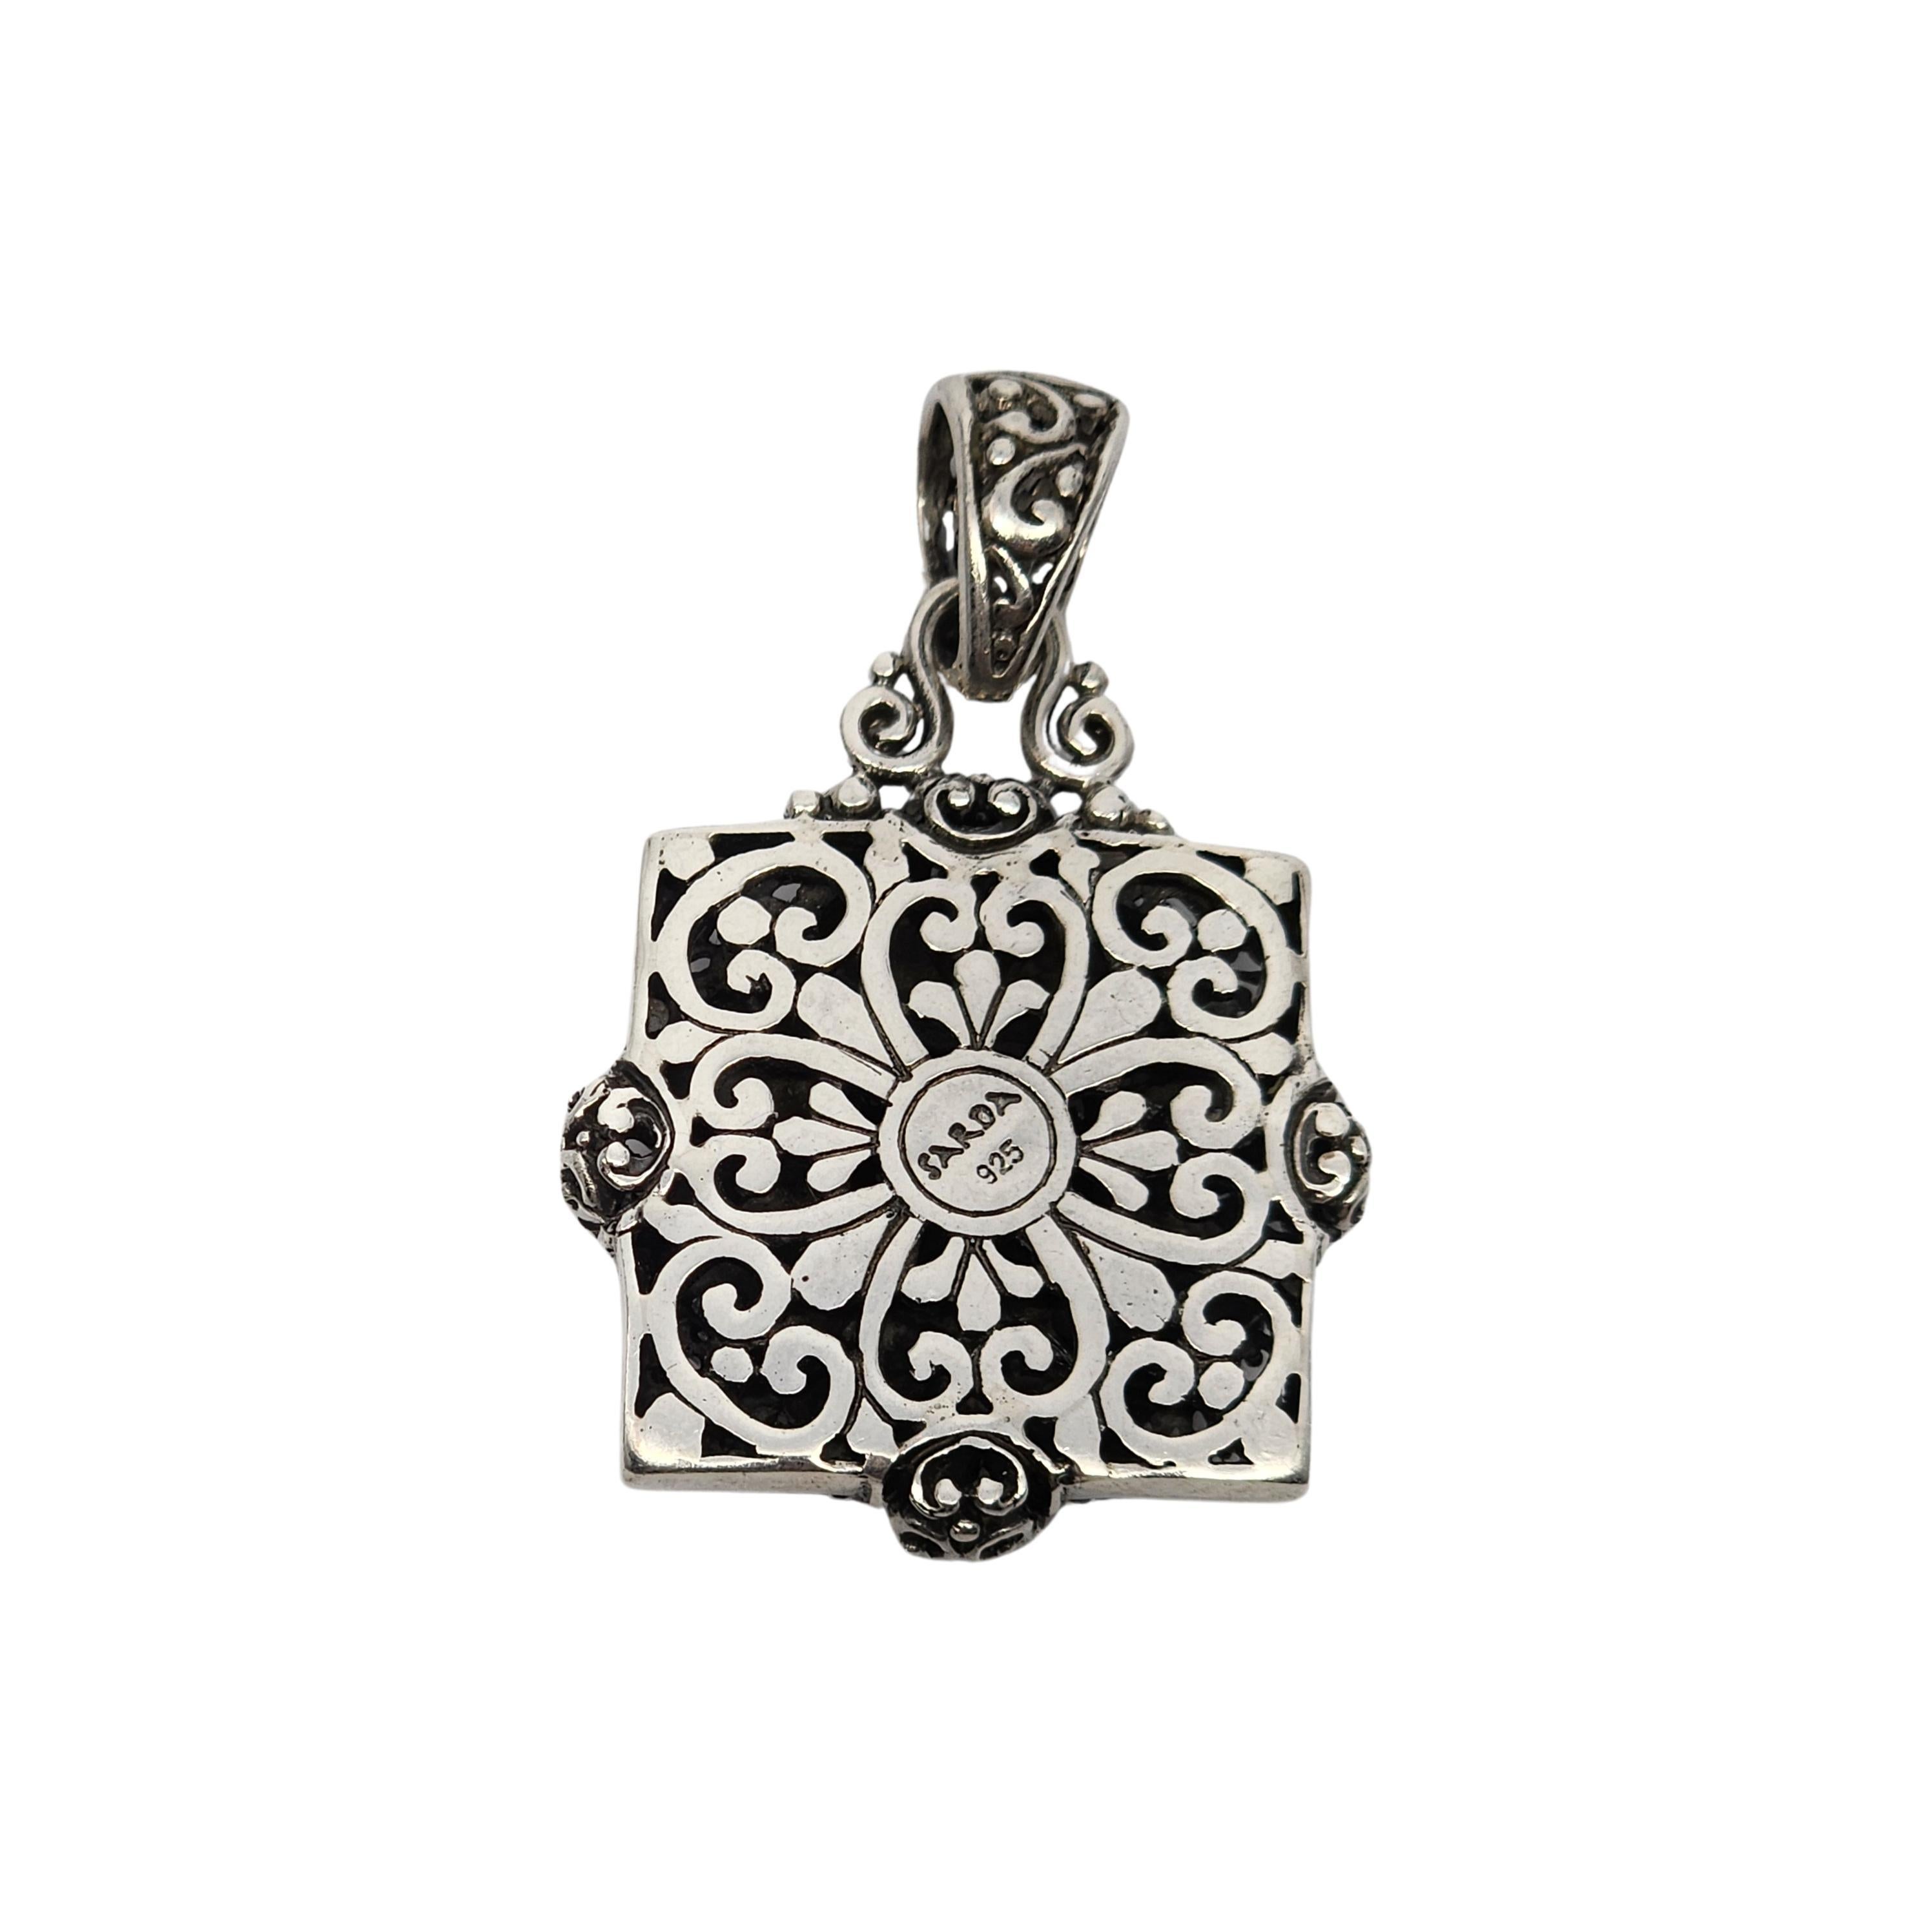 Sterling silver flower medallion pendant by Sarda.

A beautifully detailed and intricate flower design with cut-out scroll work bale.

Measures approx 1 3/4